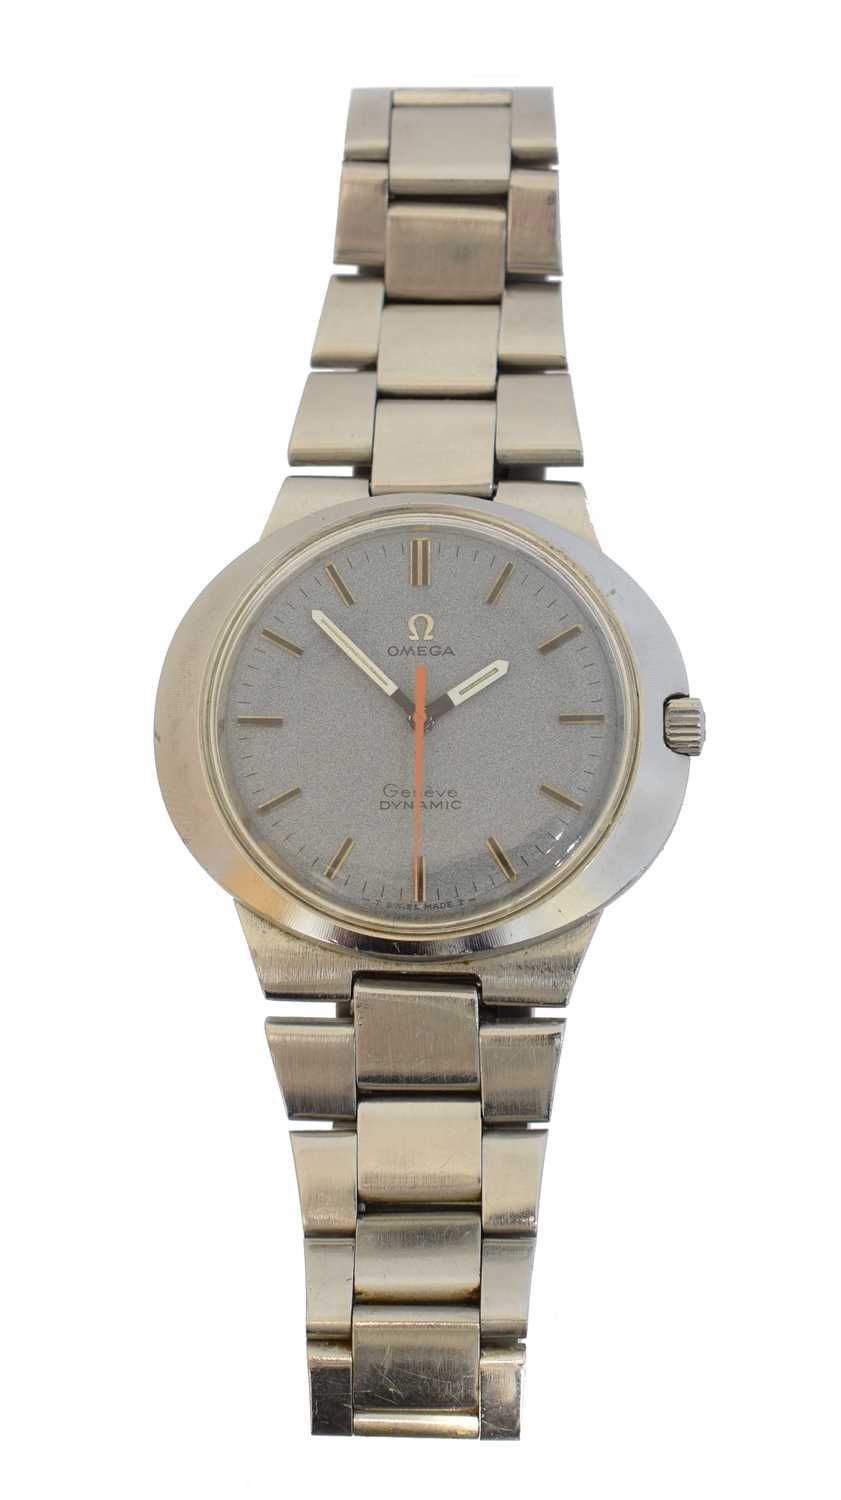 An Omega Geneve Dynamic wristwatch, - Image 2 of 3